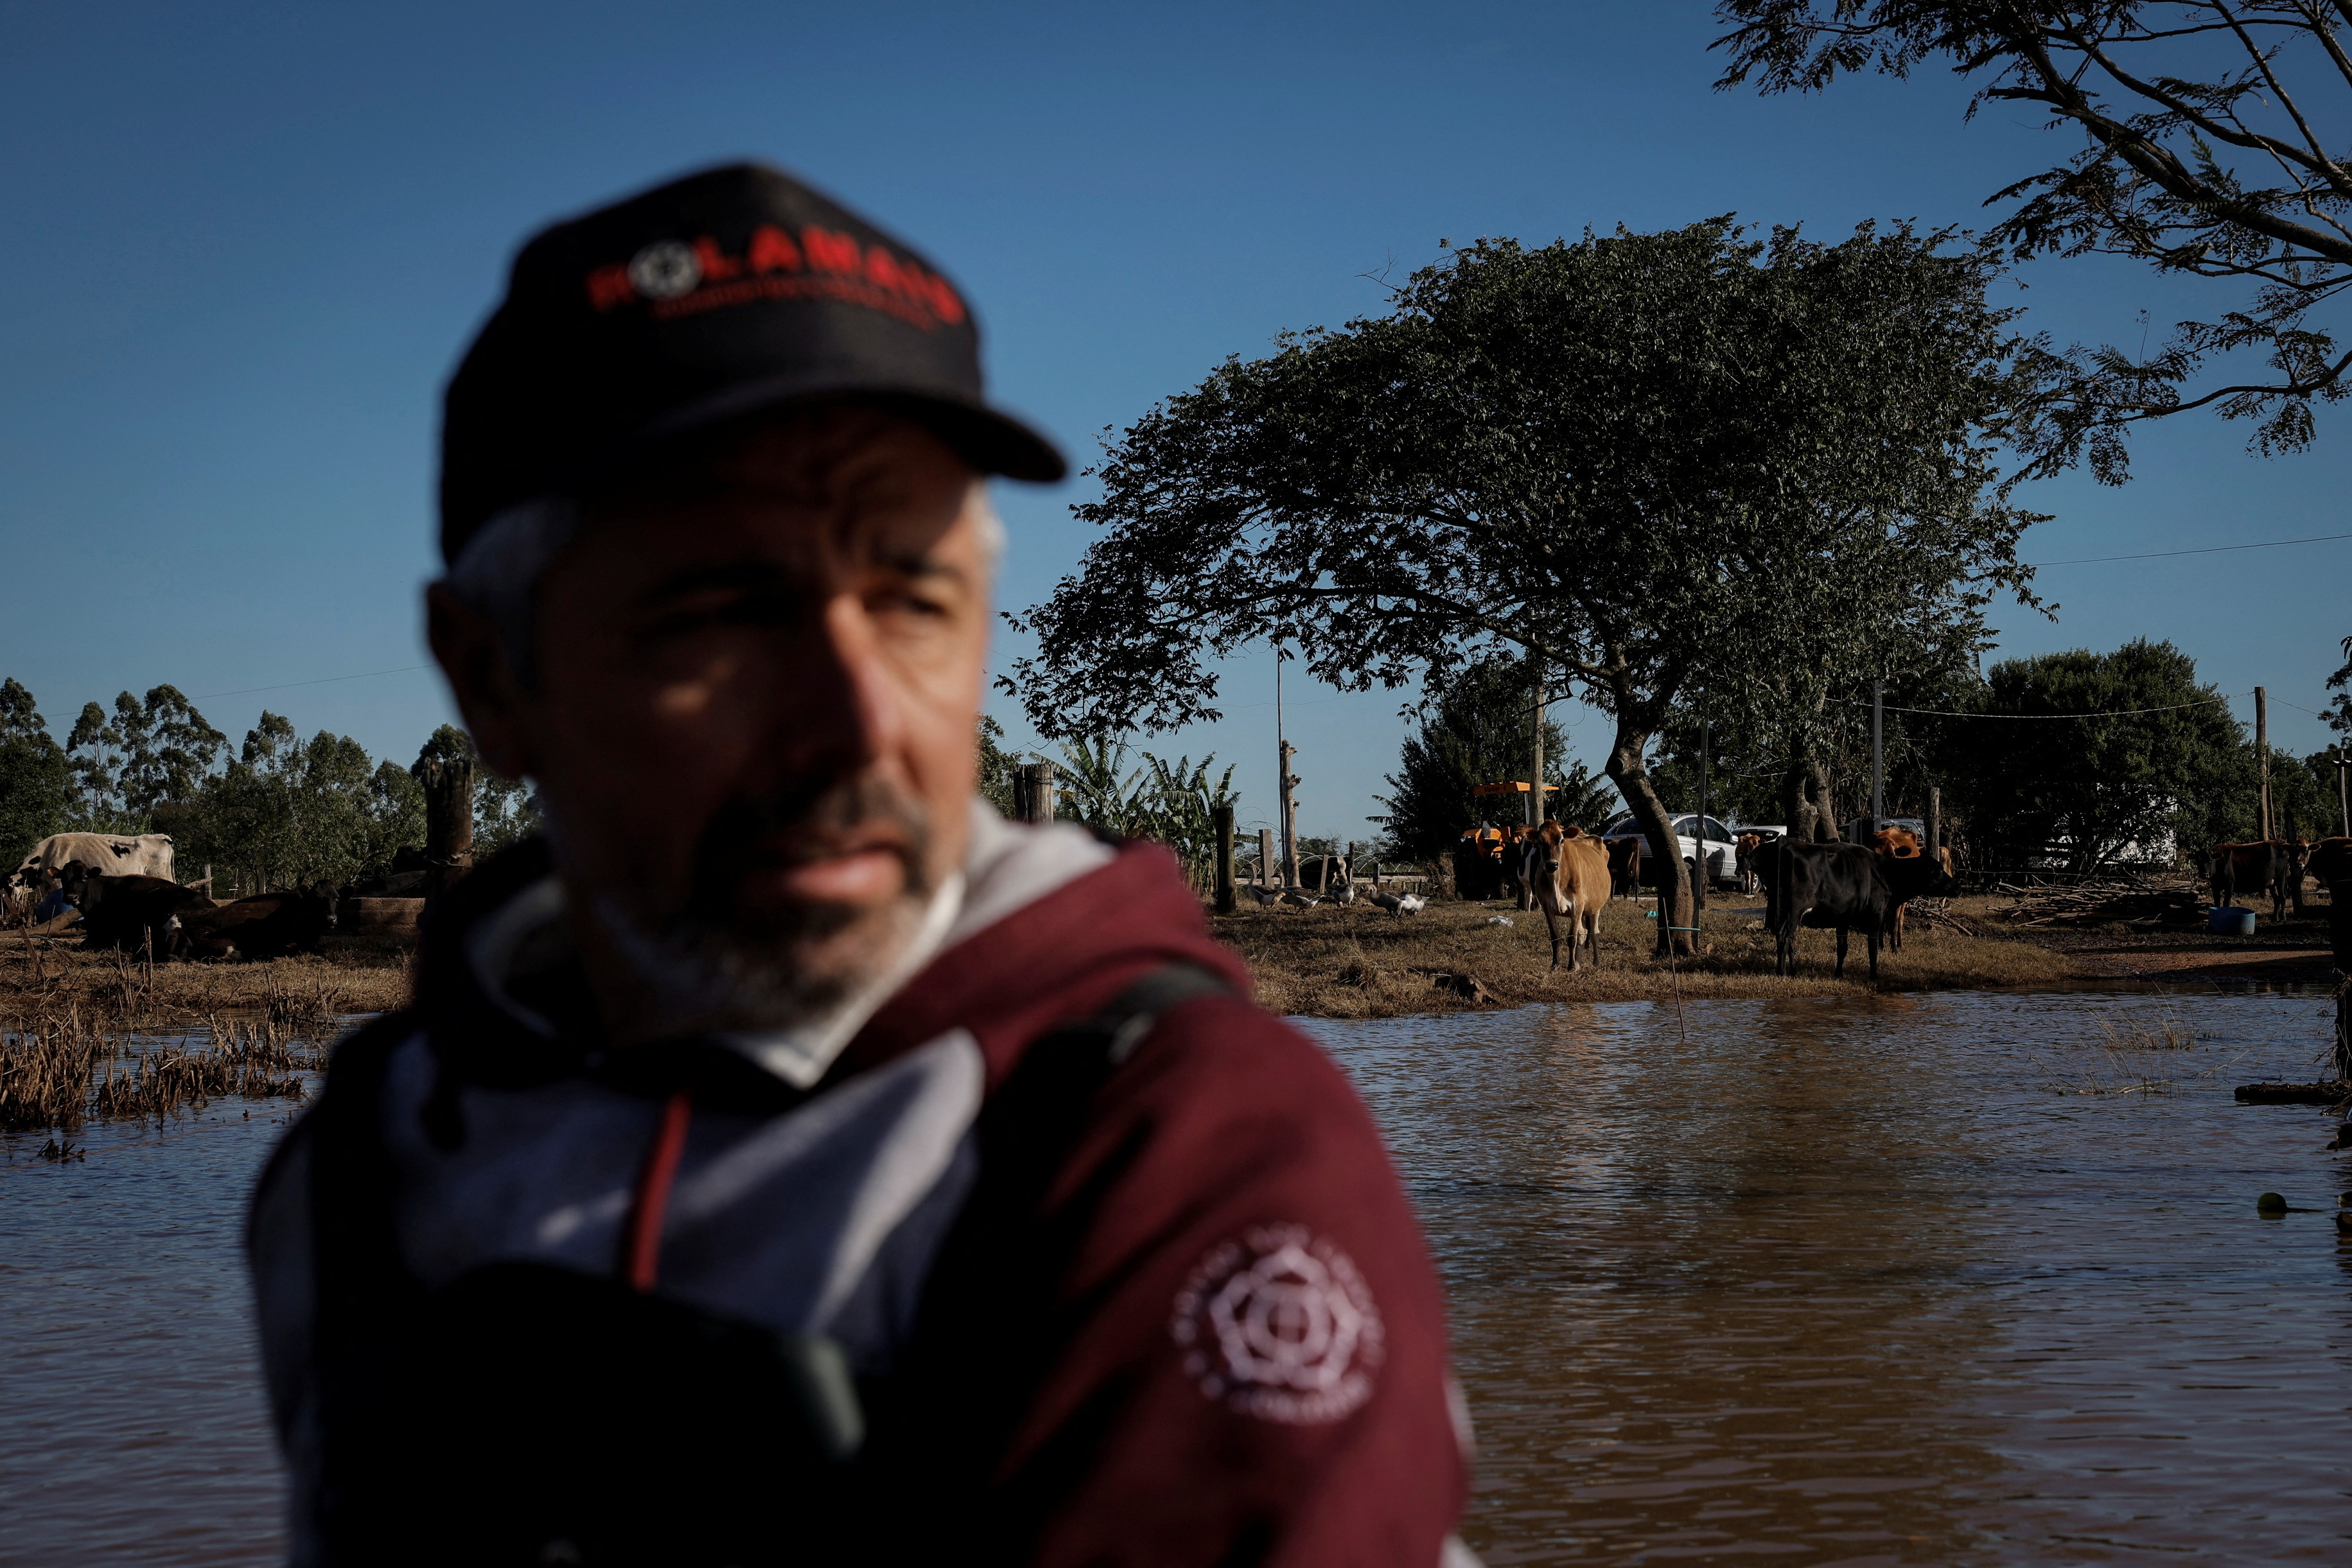 The Wider Image: Flood-battered farmers in southern Brazil wade through lost harvests